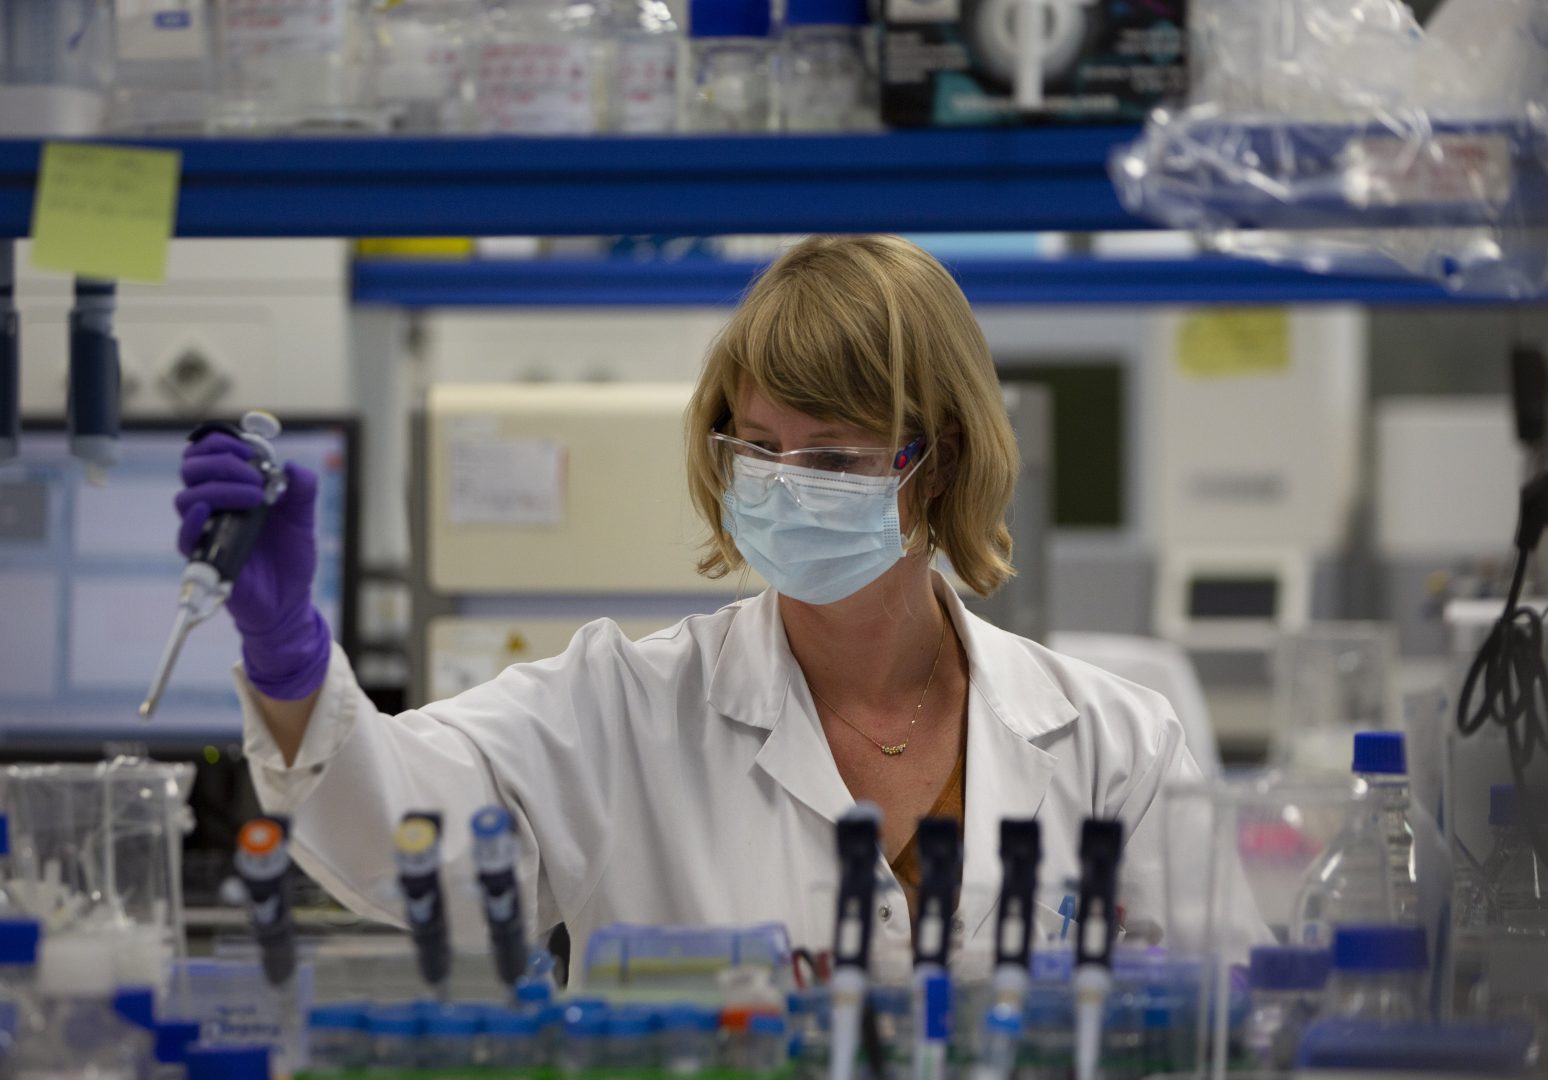 FILE PHOTO: A lab technician works during research on coronavirus, COVID-19, at Johnson & Johnson subsidiary Janssen Pharmaceutical in Beerse, Belgium, Wednesday, June 17, 2020. 